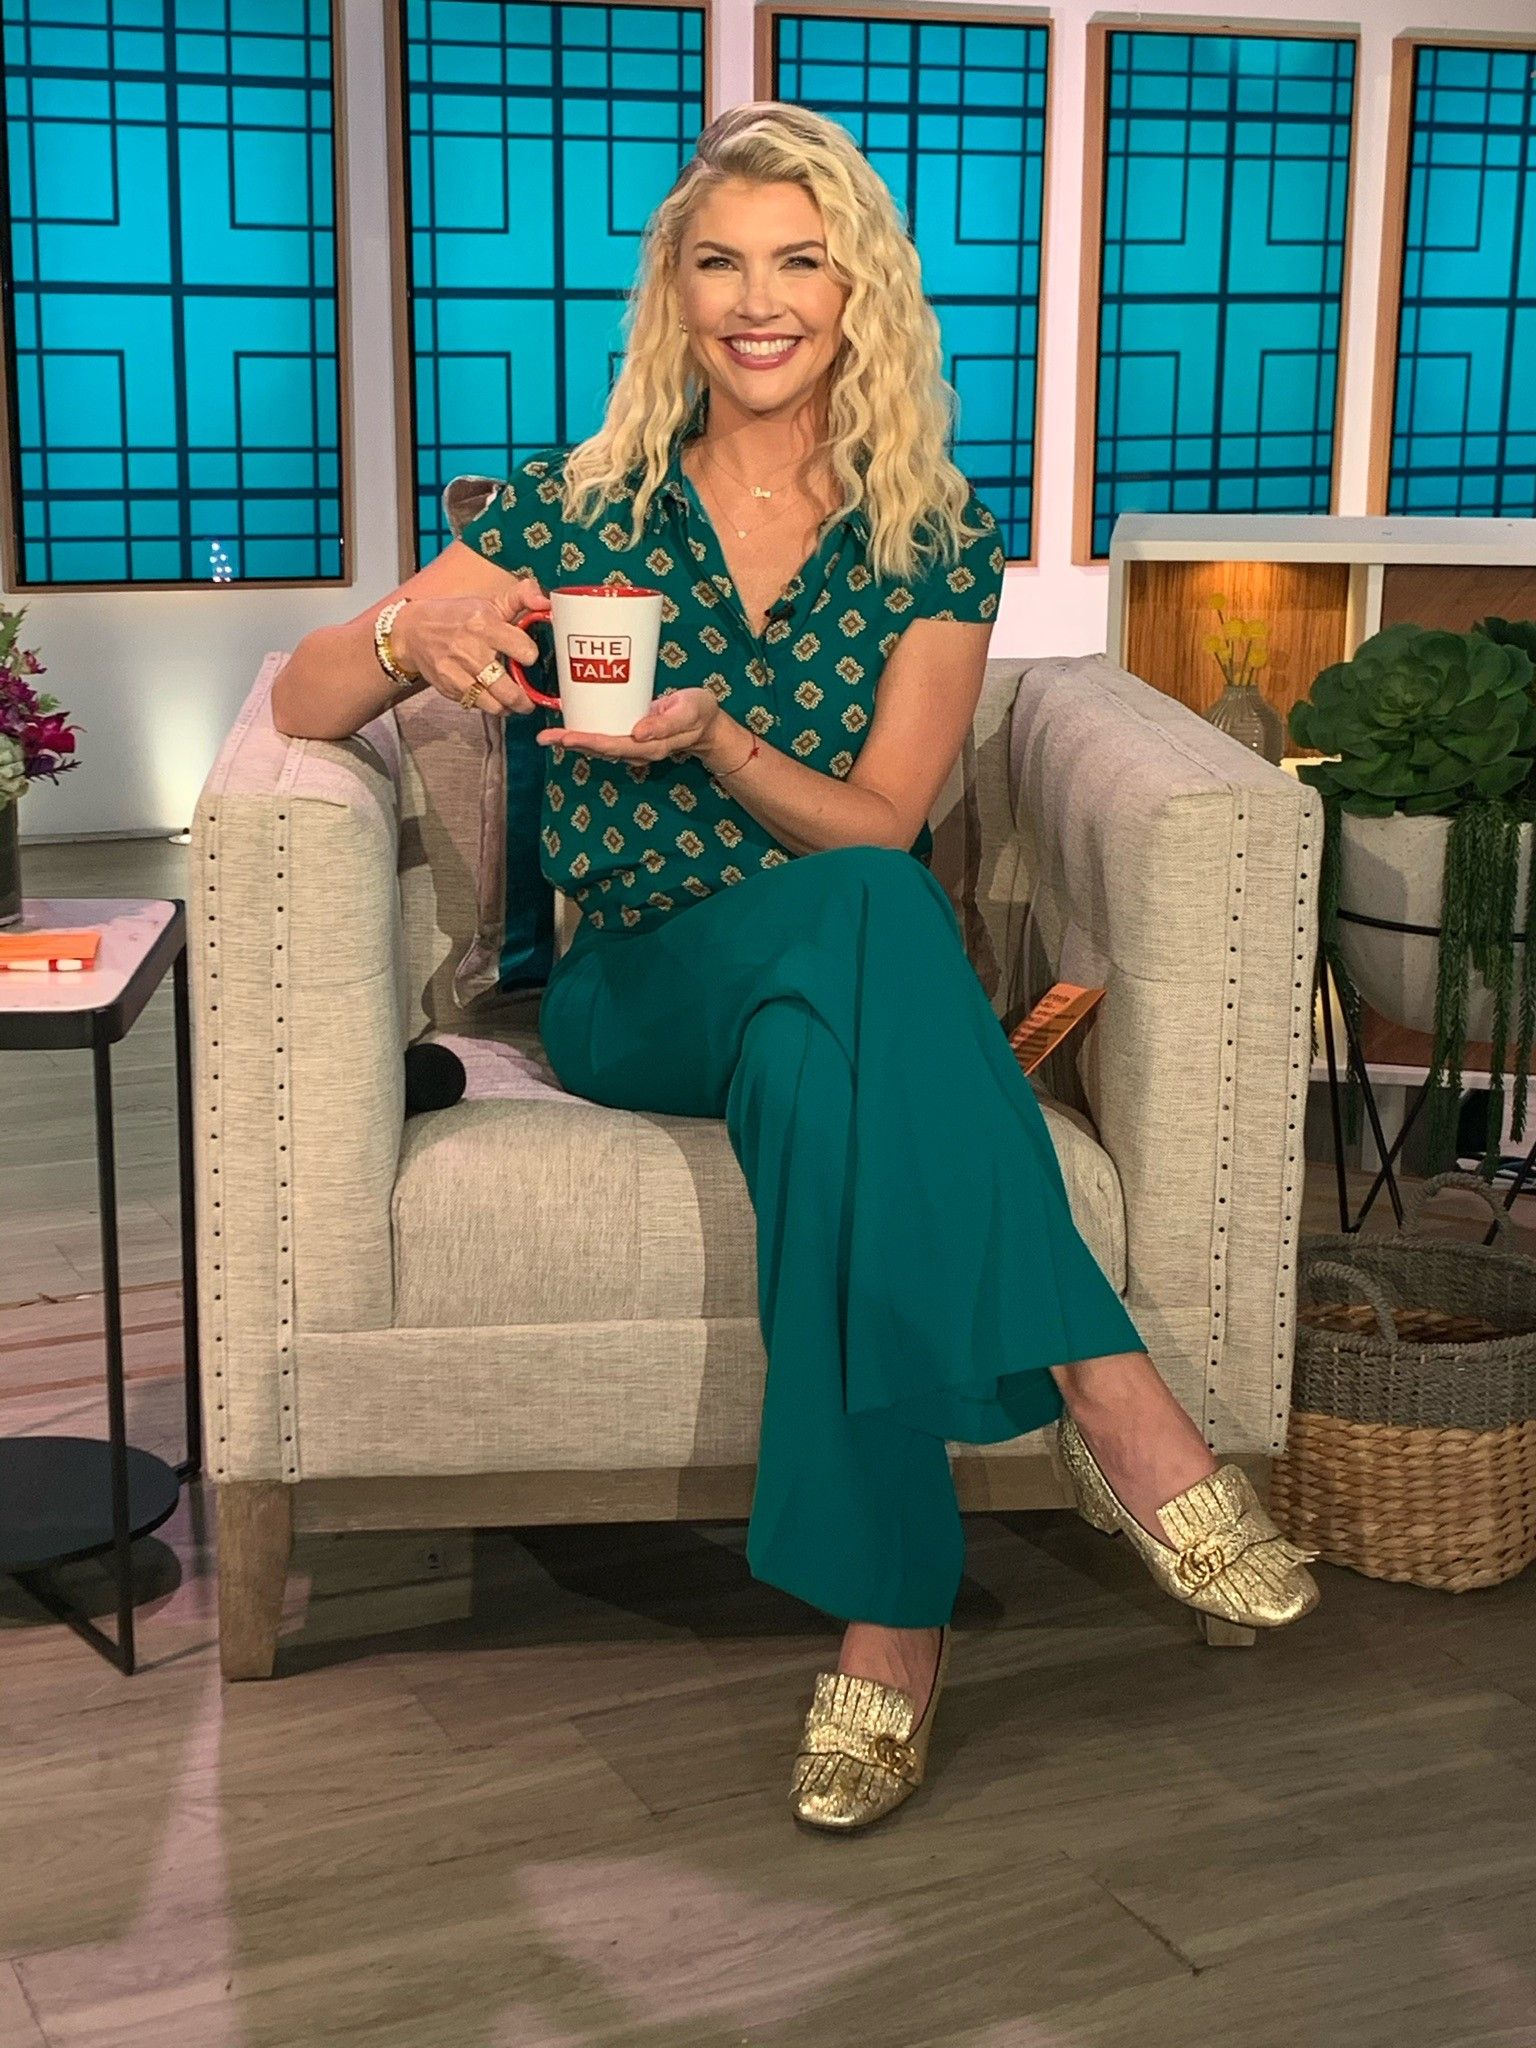 Amanda Kloots announced as a new host for season 11 of "The Talk," on December 1, 2020, on the CBS Television Network | Photo: CBS/Getty Images